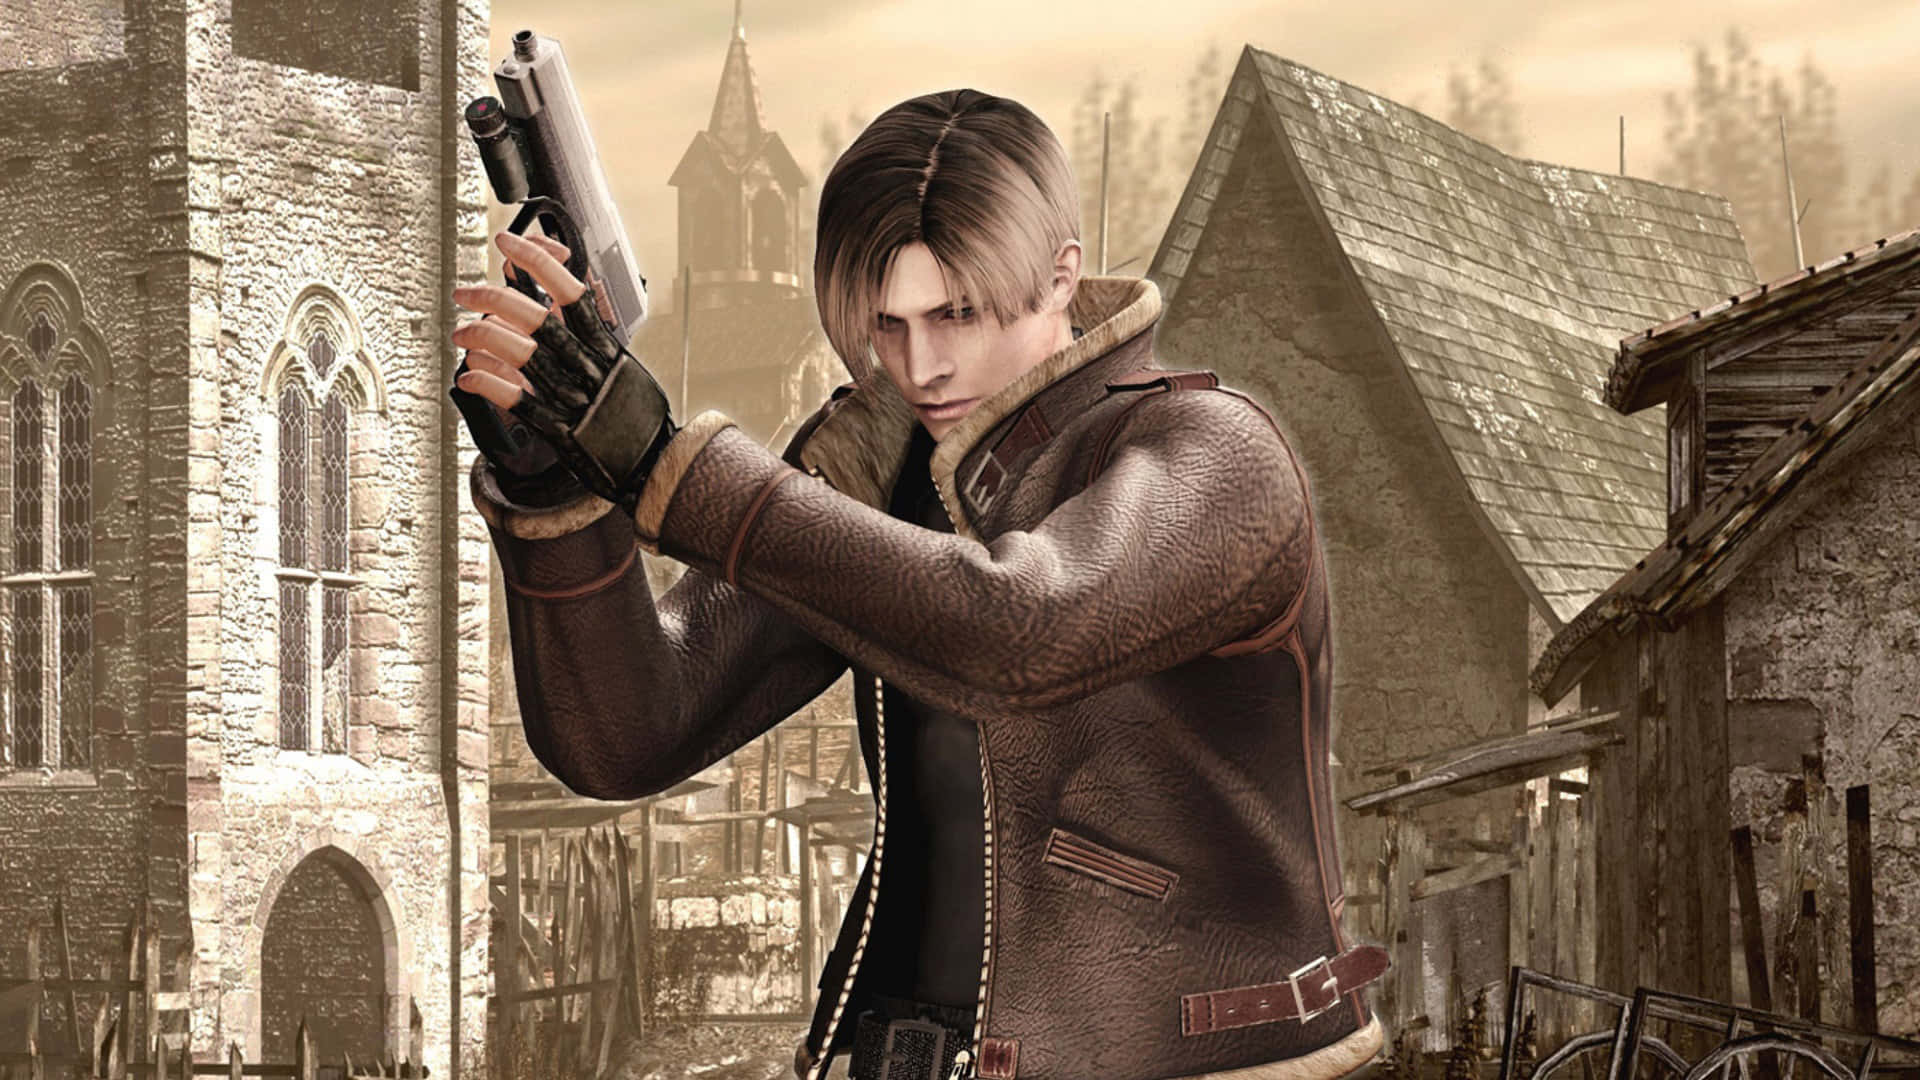 Leon S Kennedy - Fearless And Determined Wallpaper